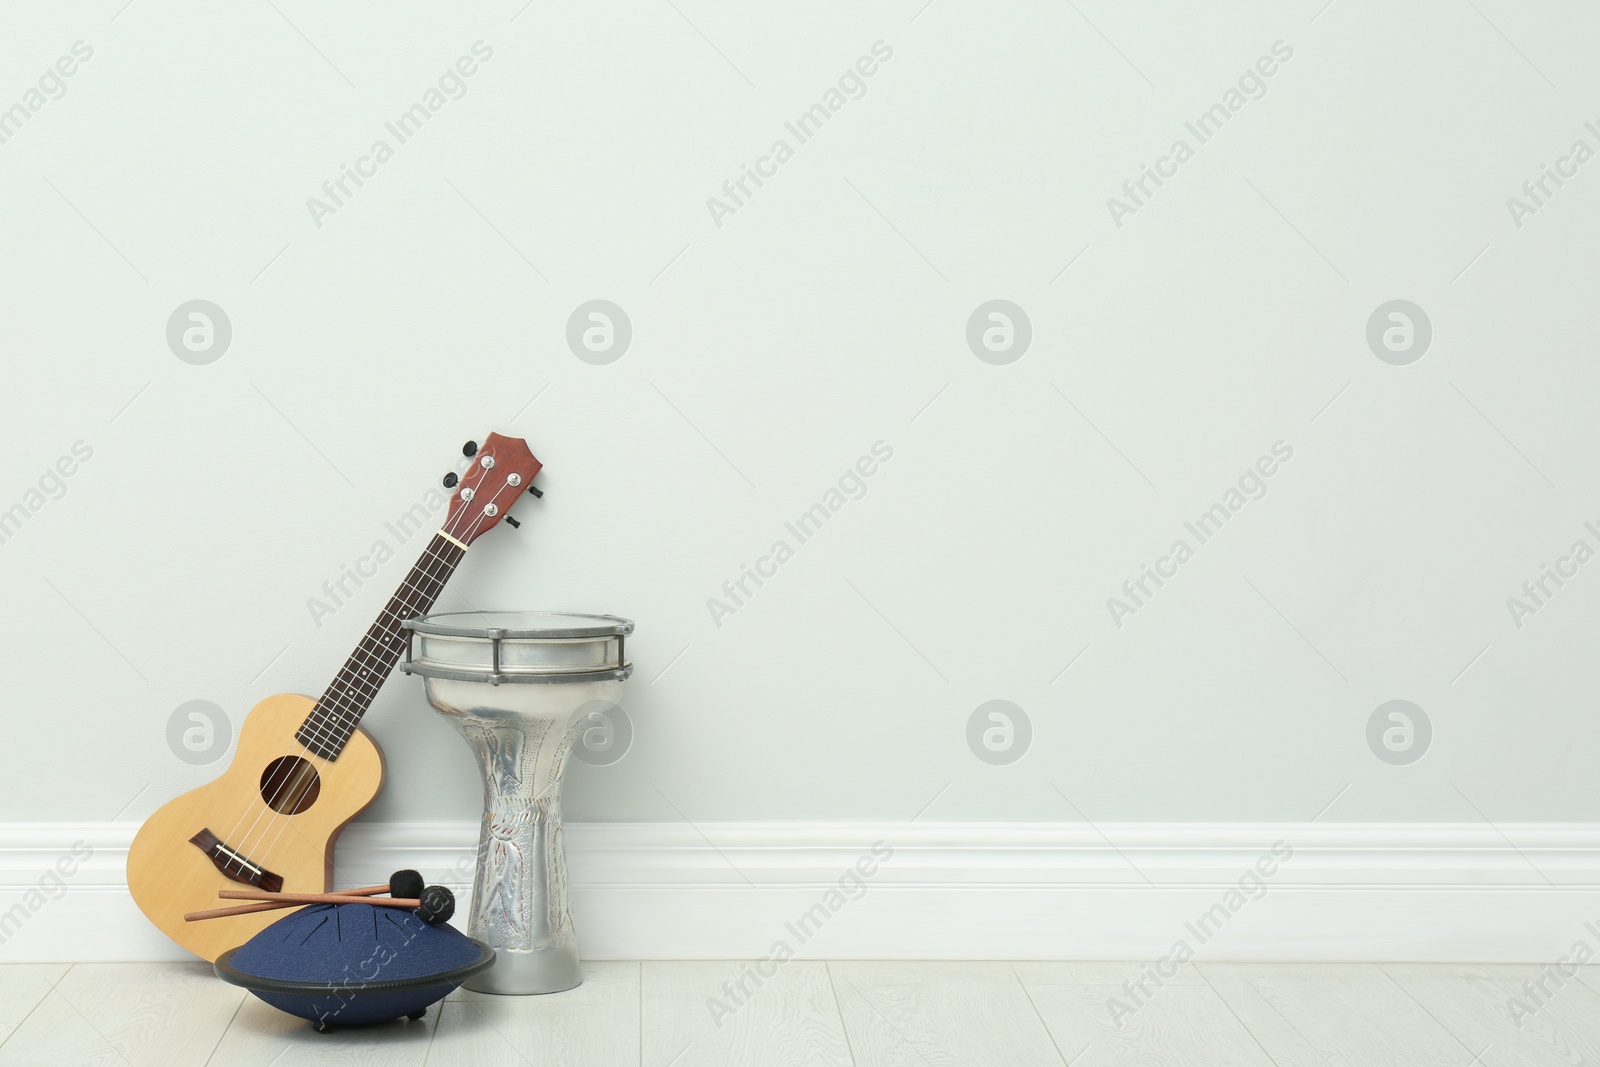 Photo of Ukulele and drums near white wall indoors, space for text. Musical instruments